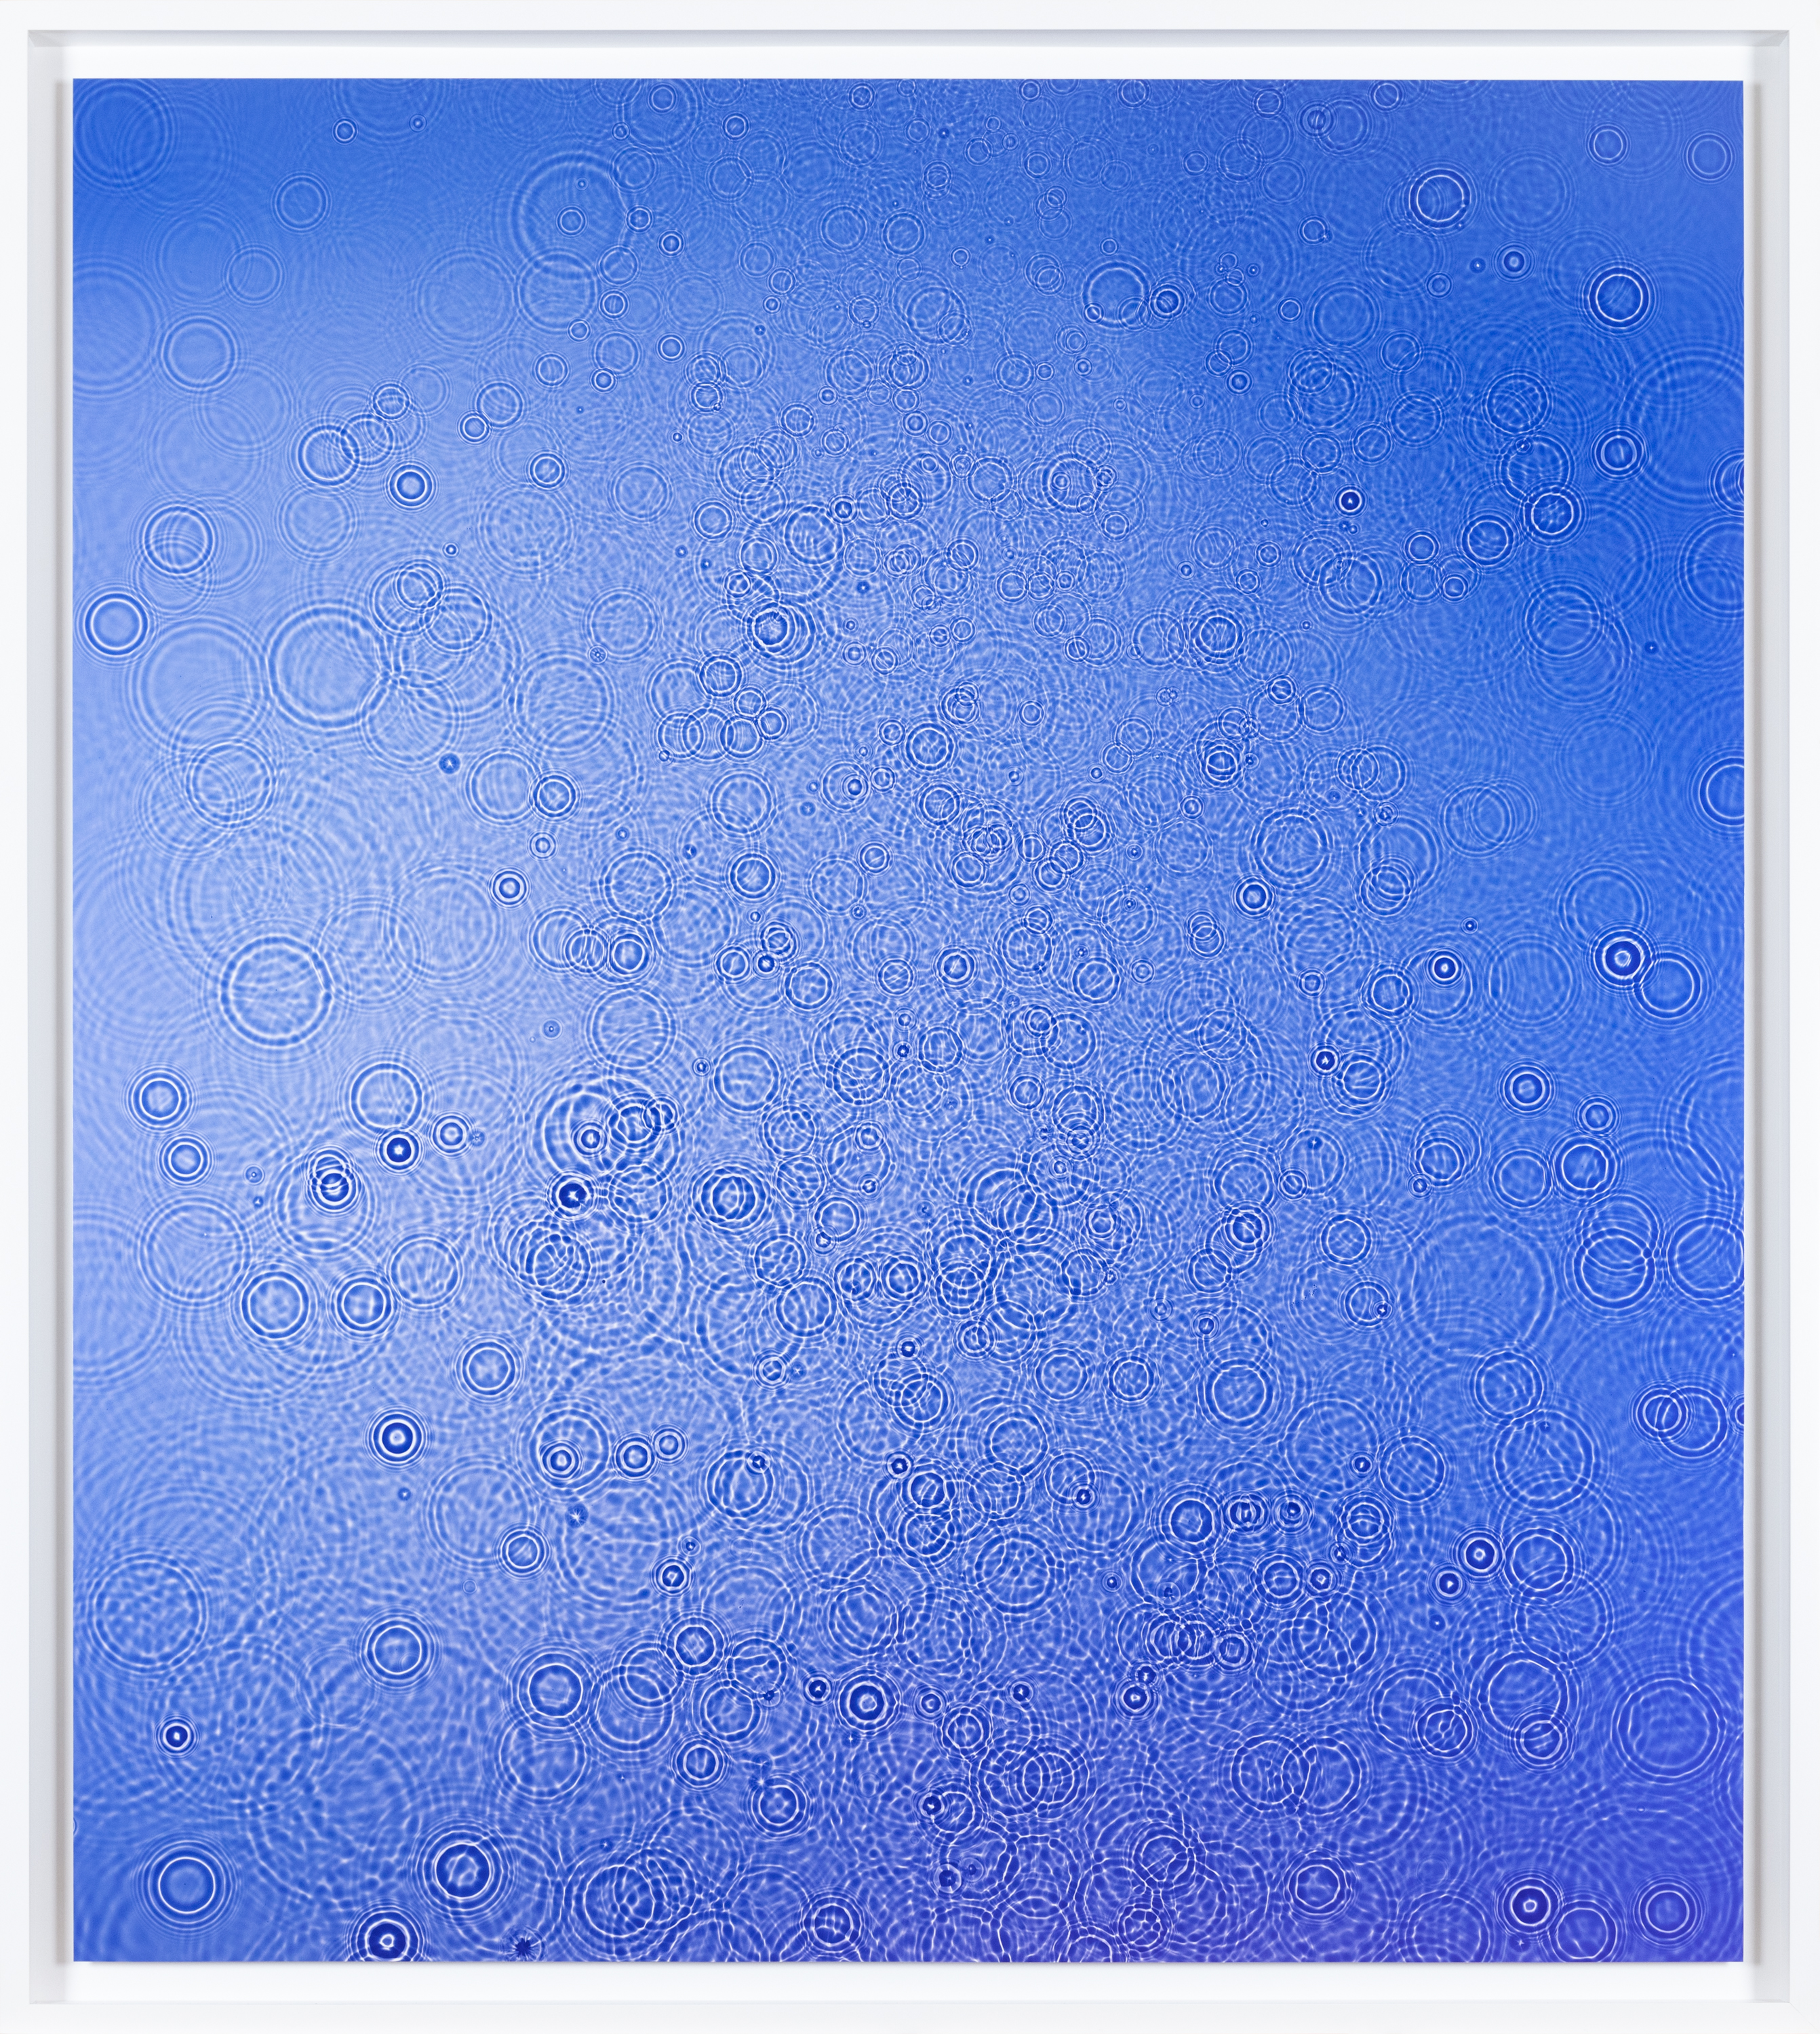 Color image of a color photograph depicting details of water in a blue hue framed in white